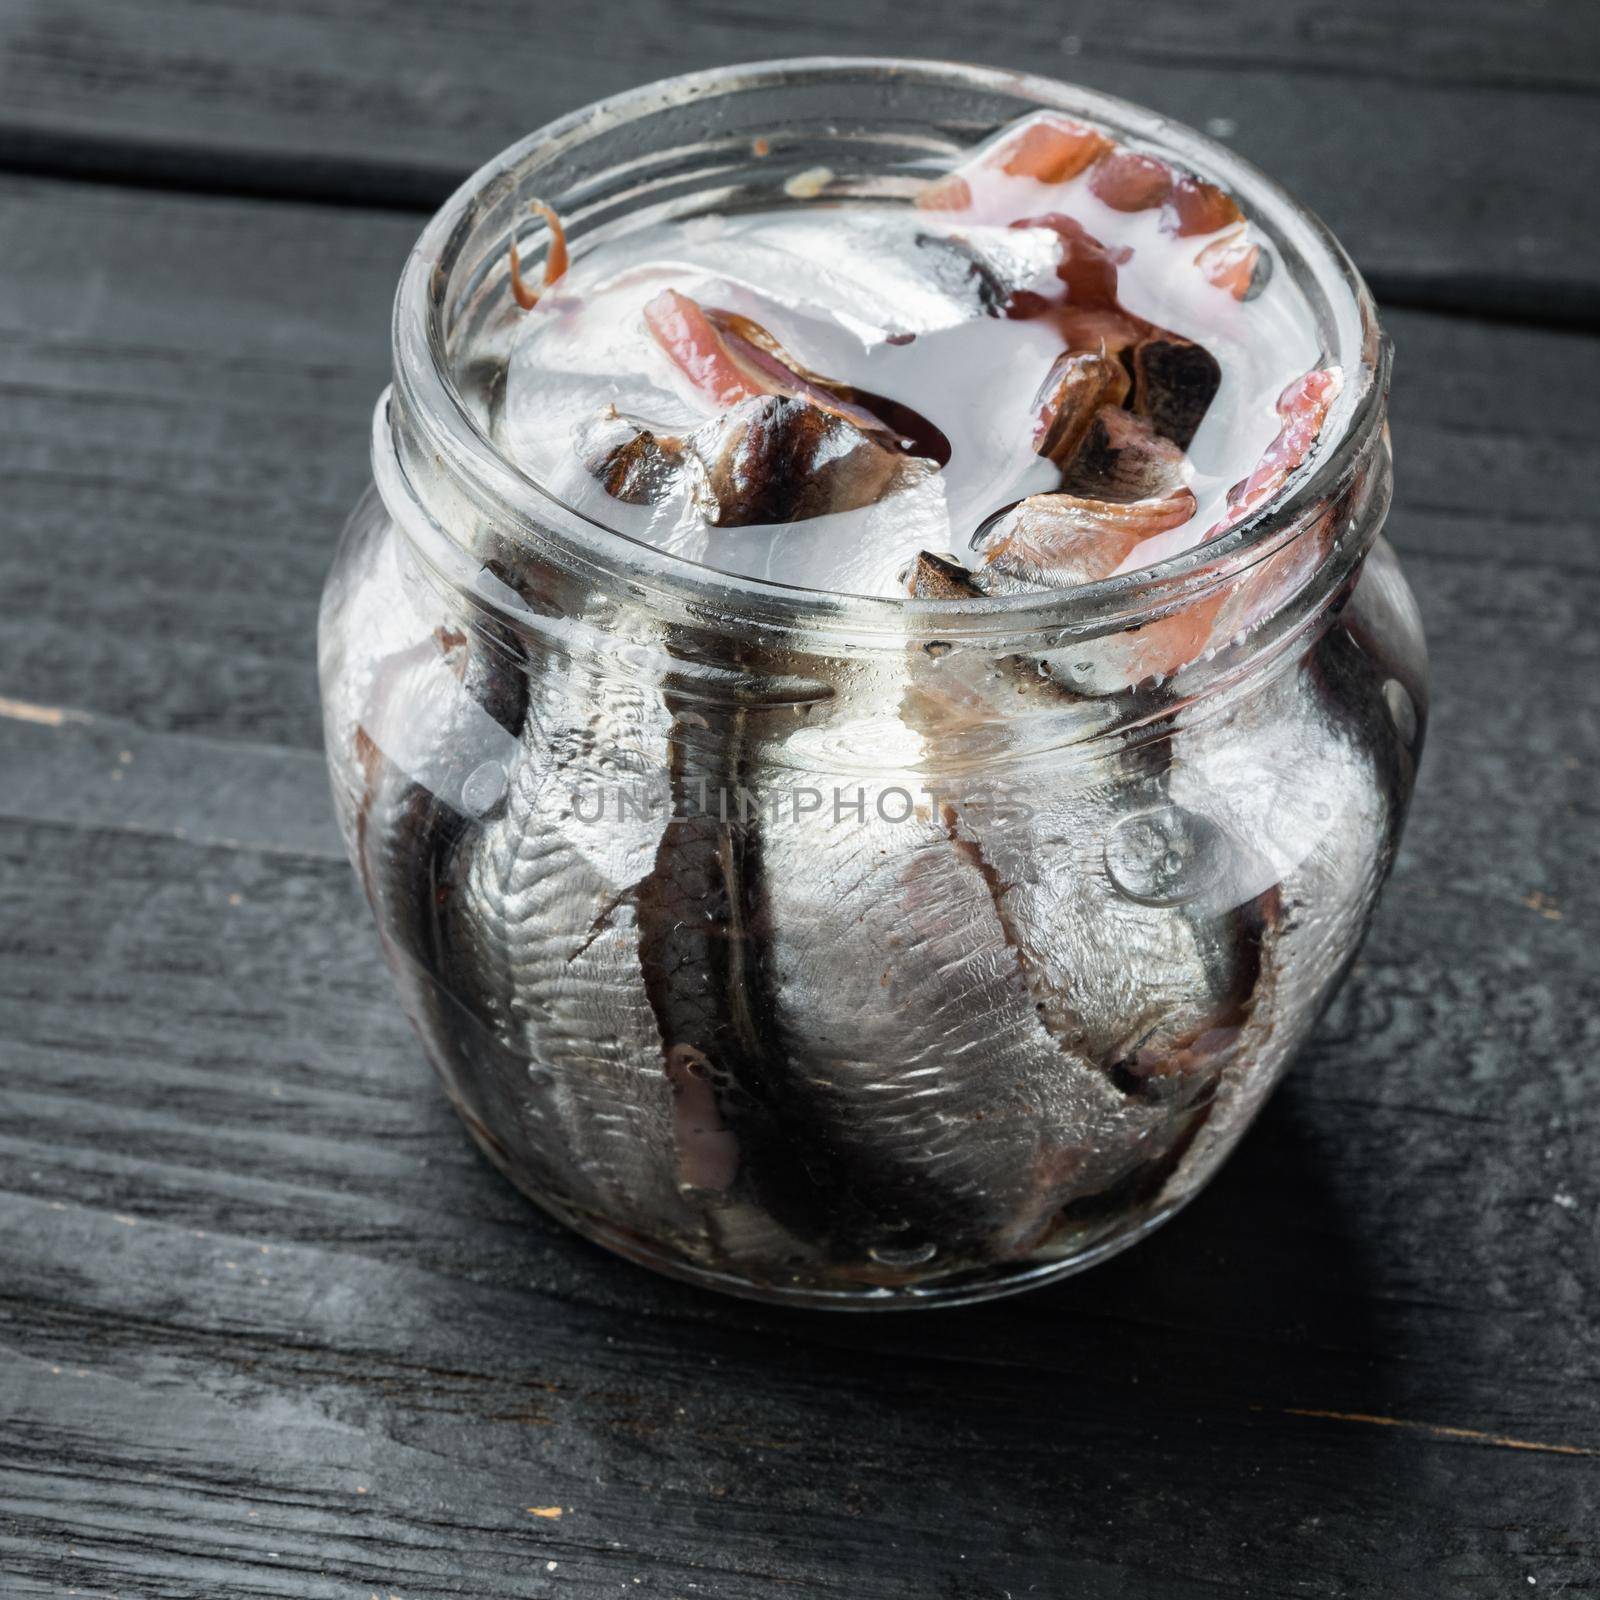 Pickled Anchovy, in glass jar, on black wooden table background, square format by Ilianesolenyi